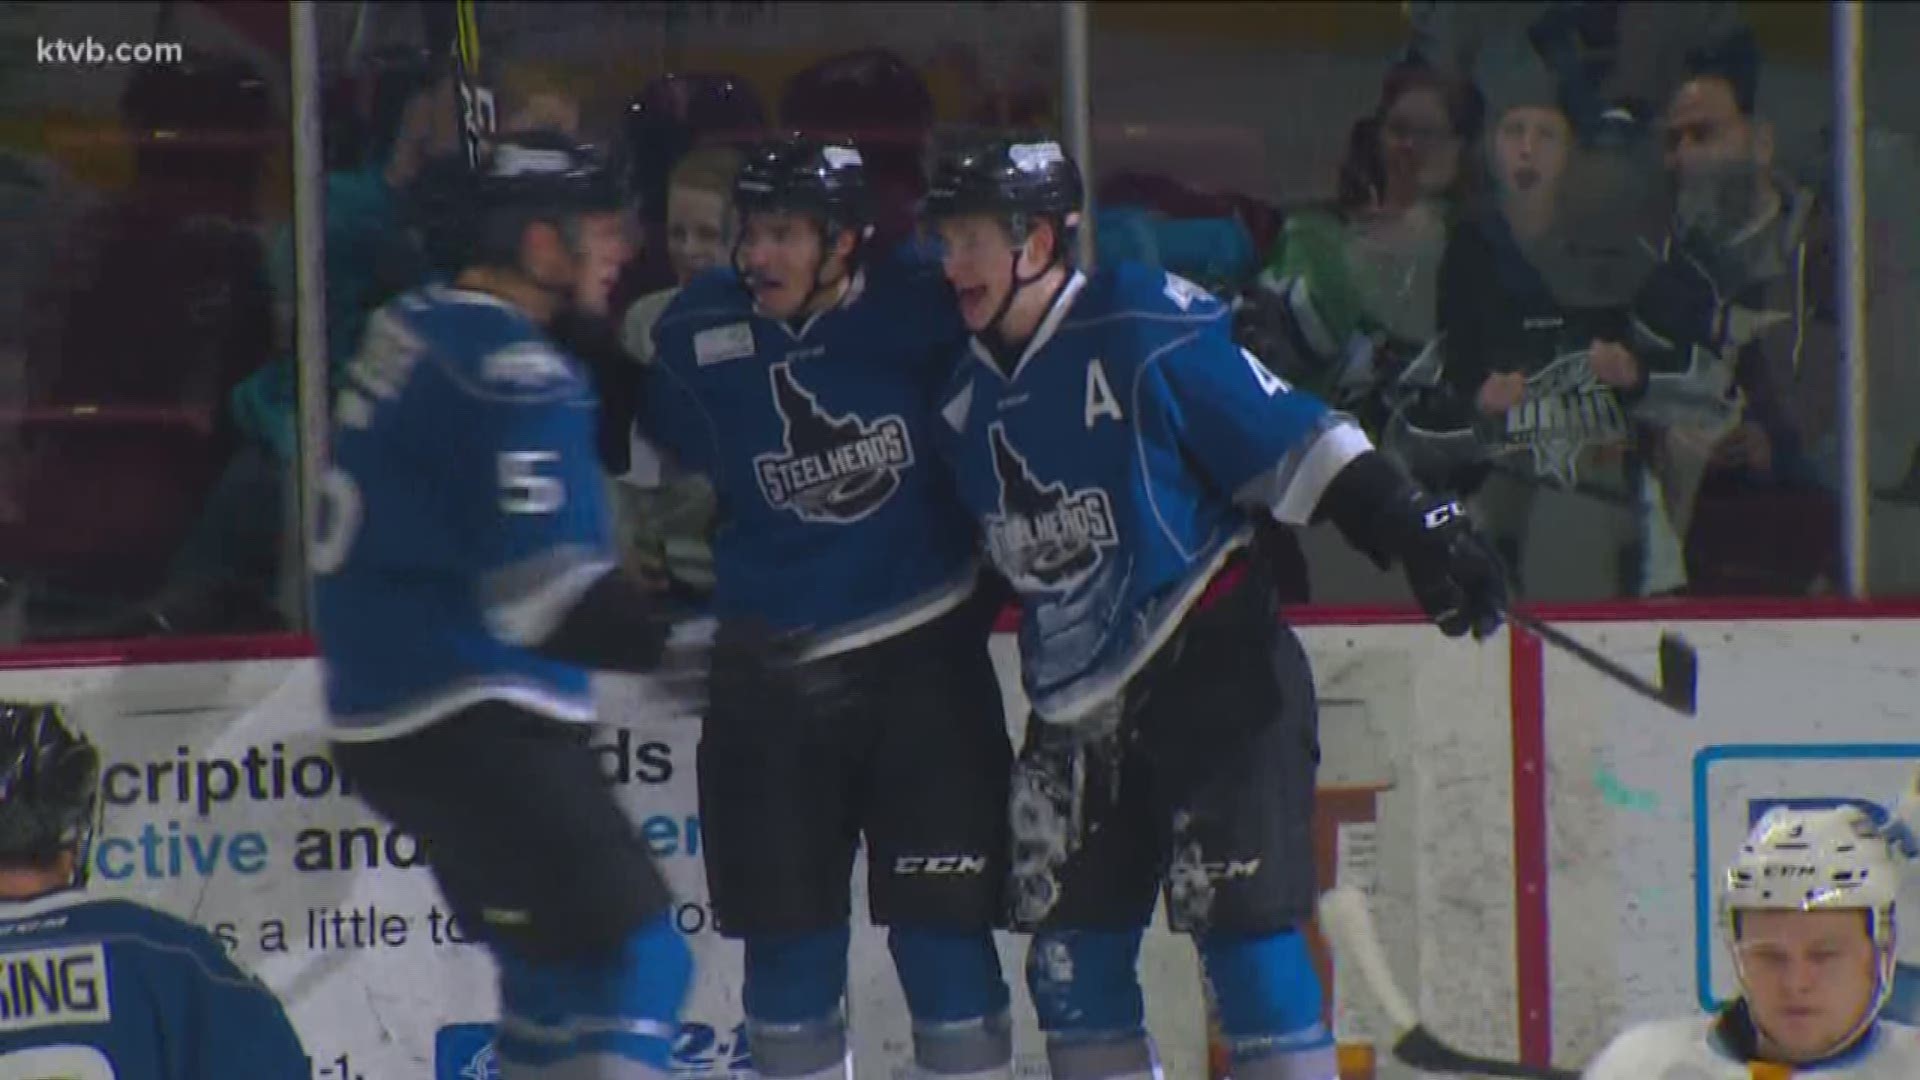 The Steelheads swept the Toledo Walleyes at home to improve 23-11-1-2 on the season.